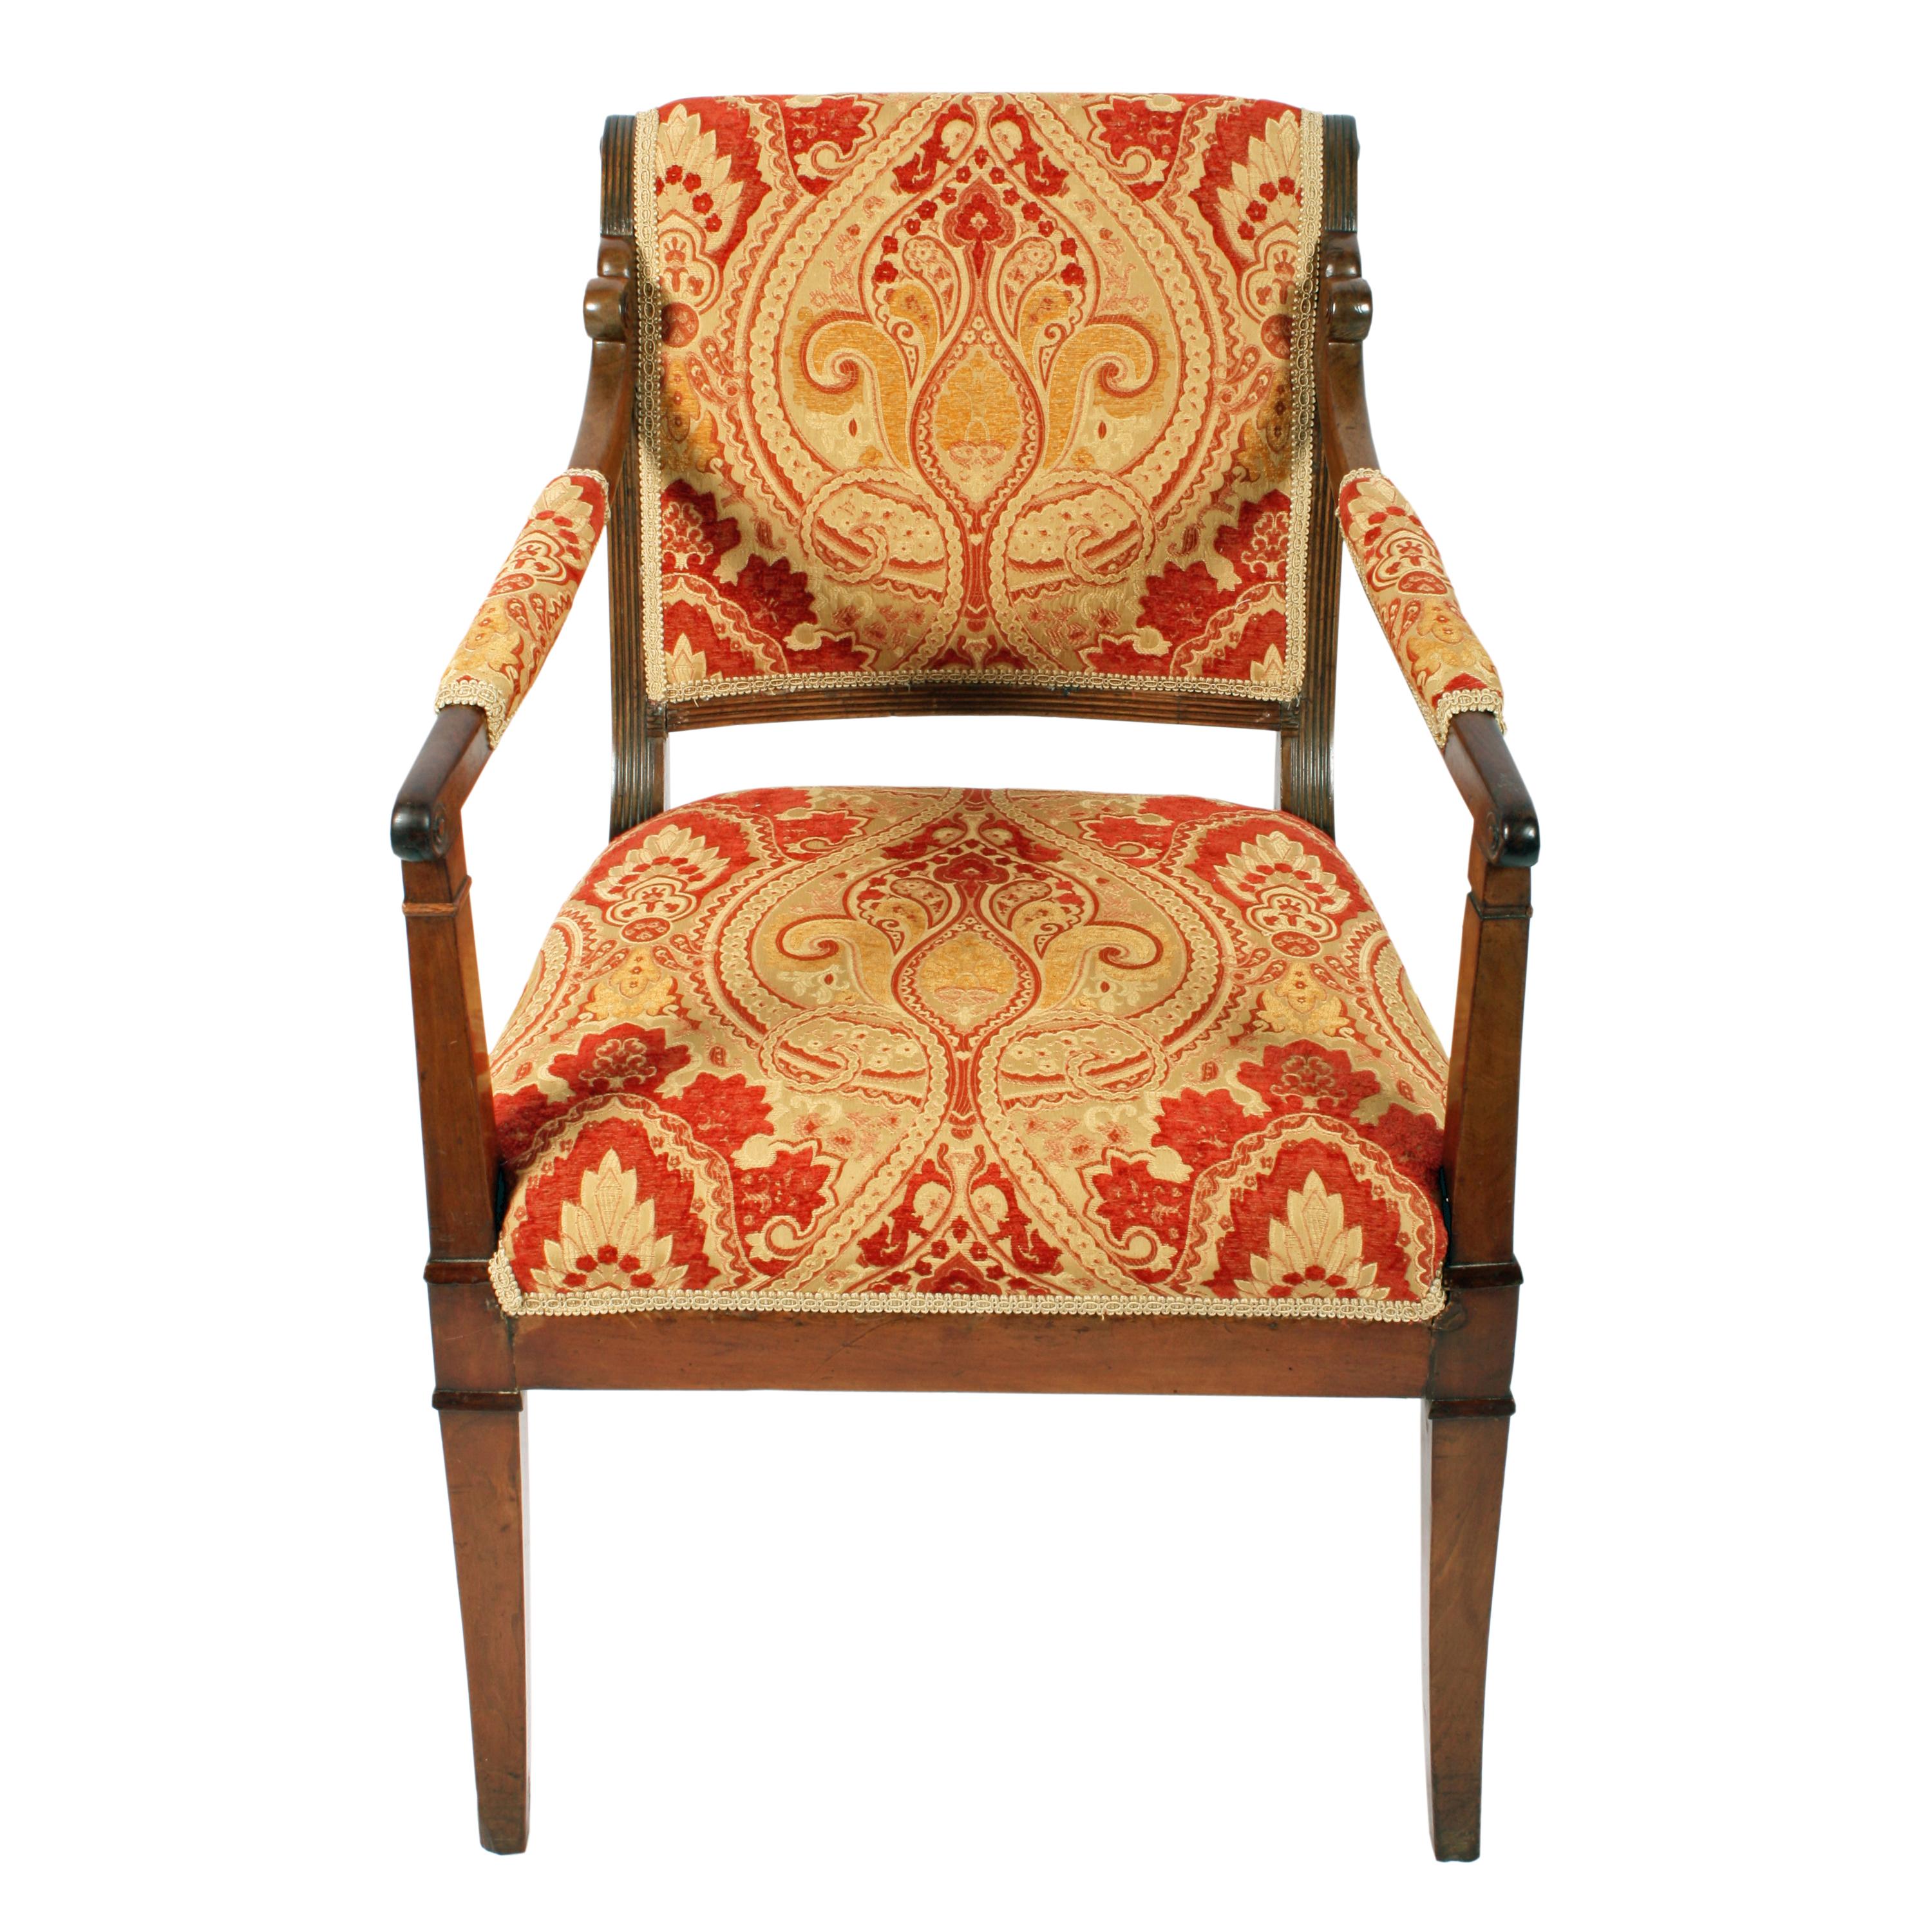 Early 19th century mahogany framed Empire design elbow chair.

The chair has square sabre legs front and back with square tapering supports for the arms.

The chair has a rollover top to the back with a reeded frame either side of the padded